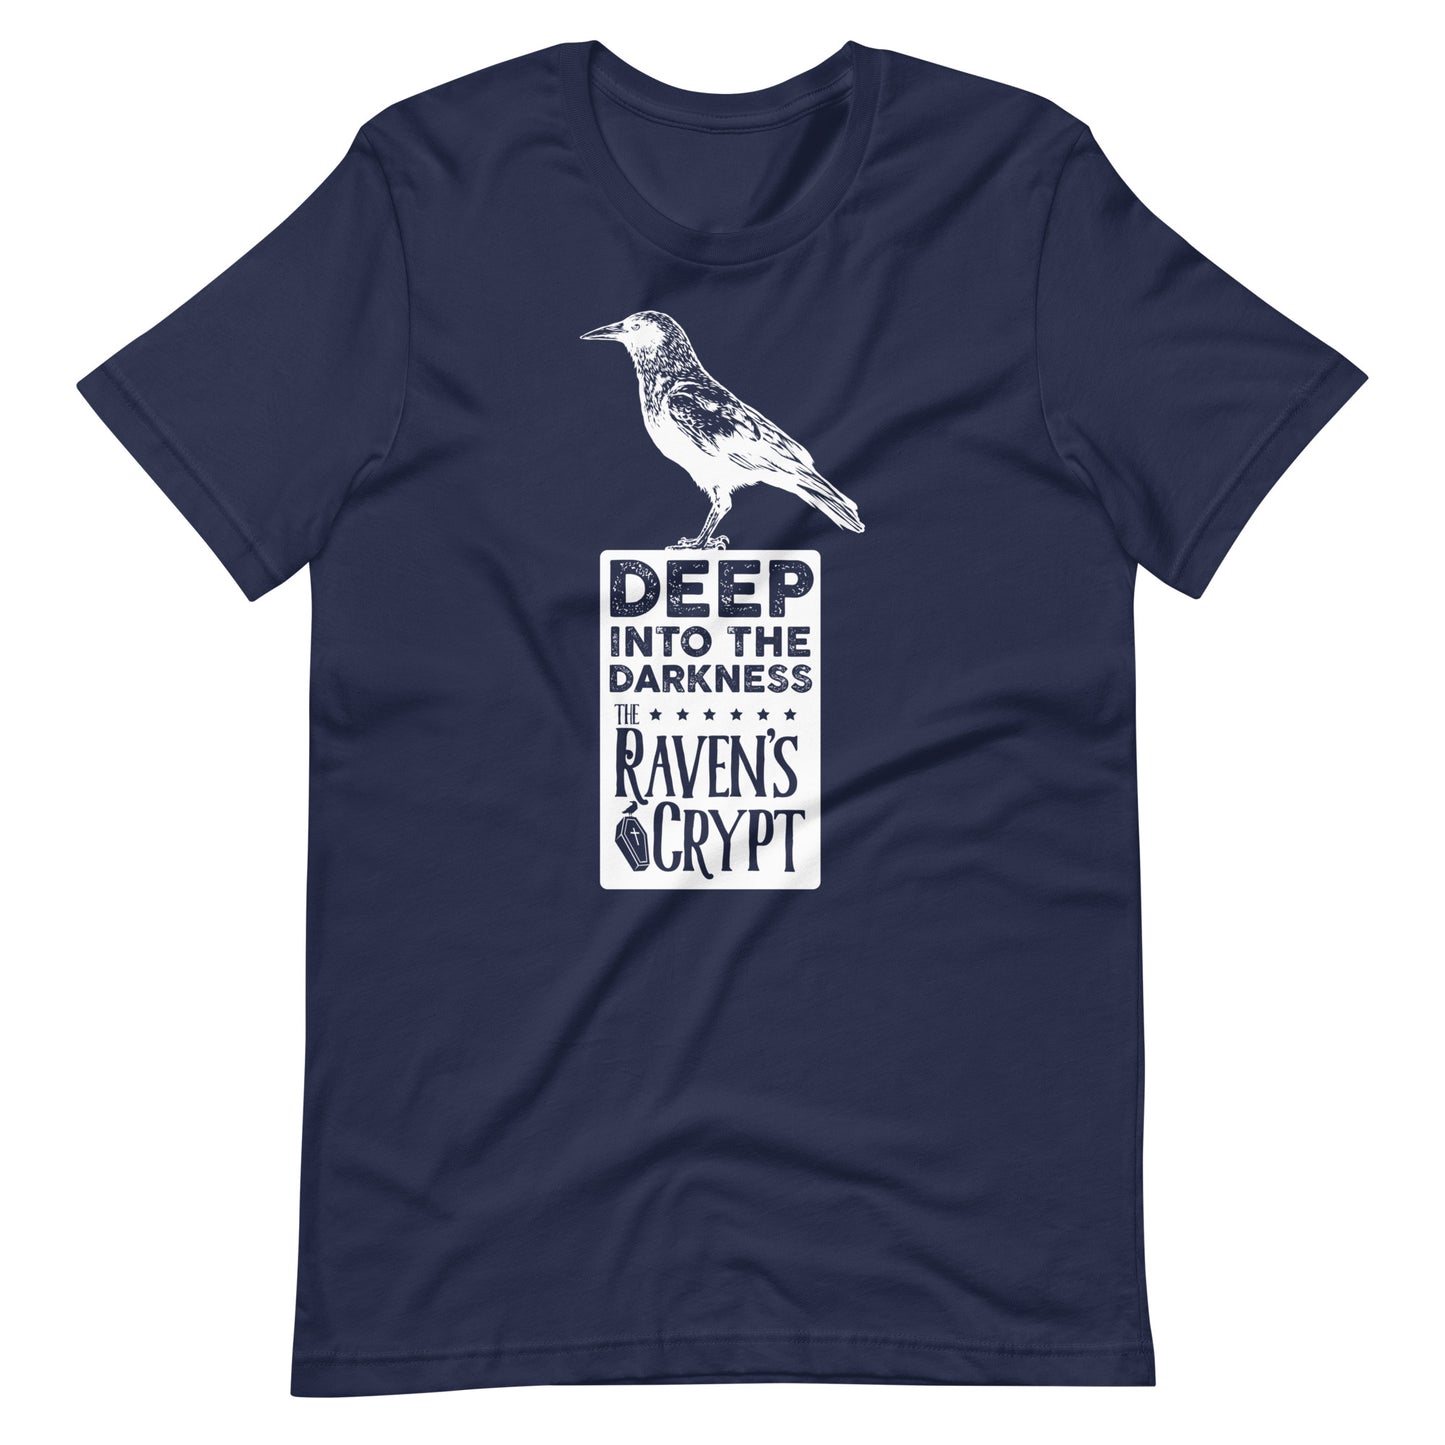 Deep Into the Darkness Crypt 2 - Men's t-shirt- Navy Front